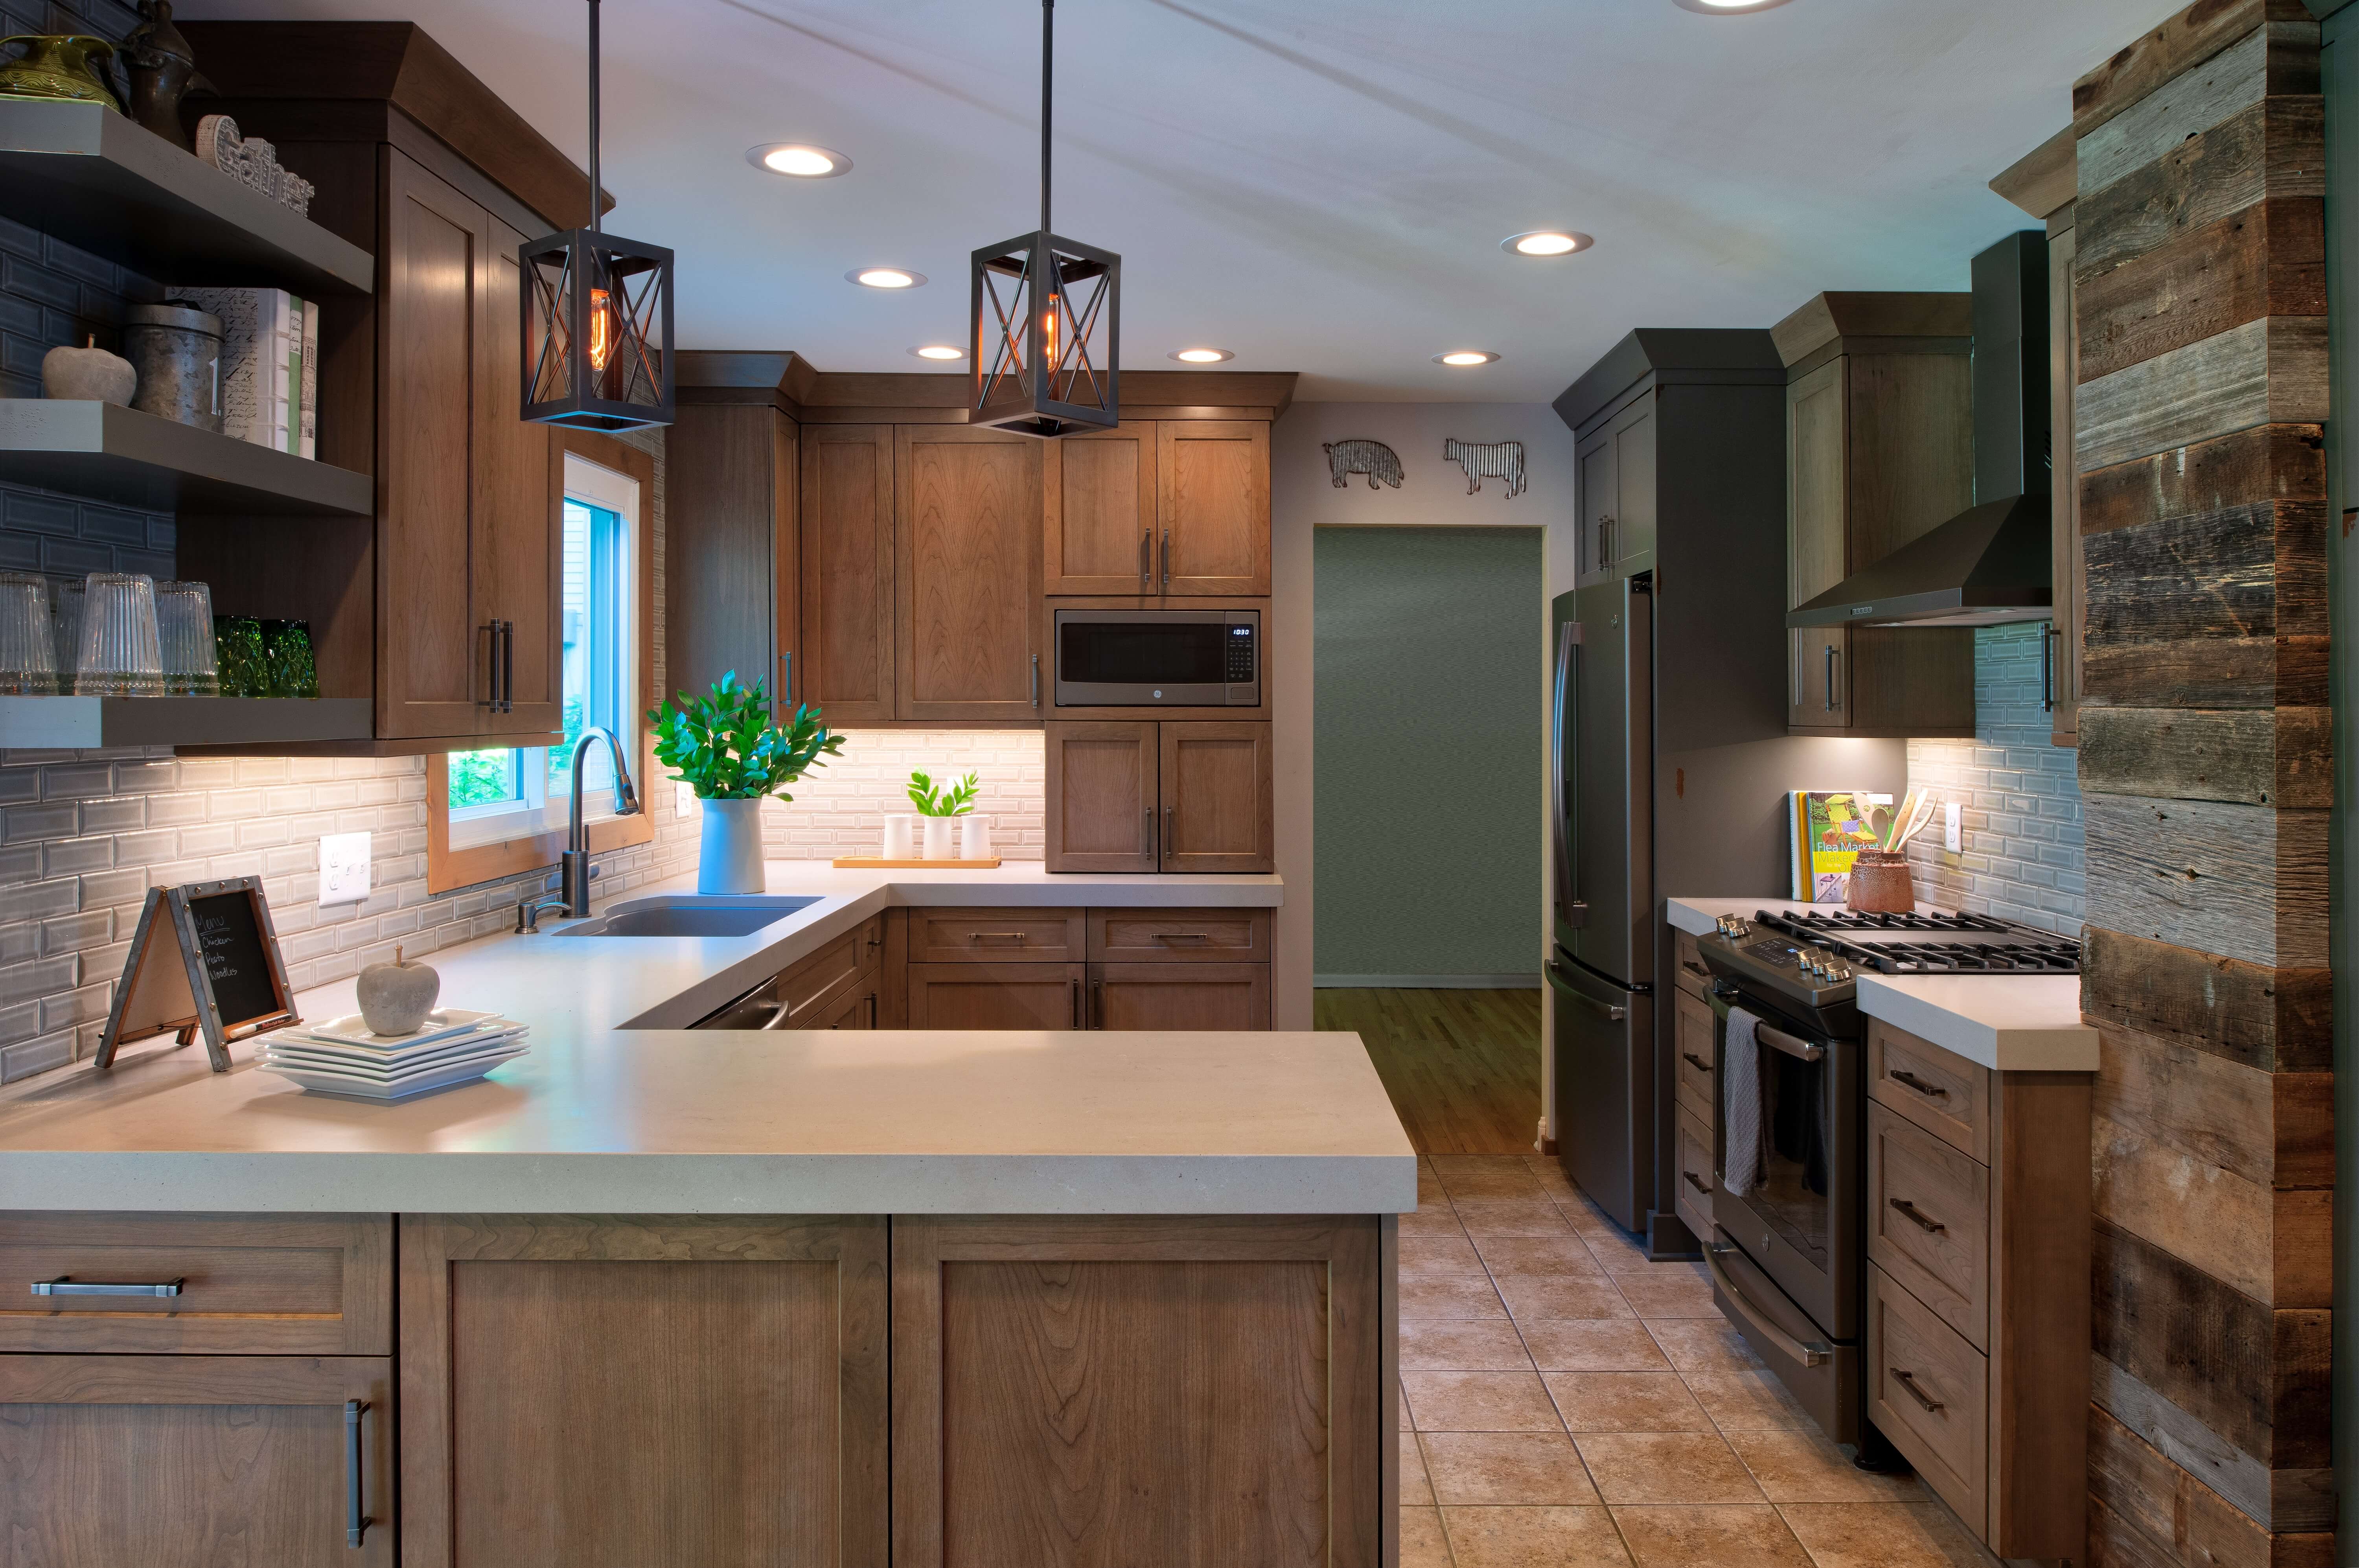 A stunning industial style kitchen dseing with wood cabinets and distressed painted cabinets with a rustic look.